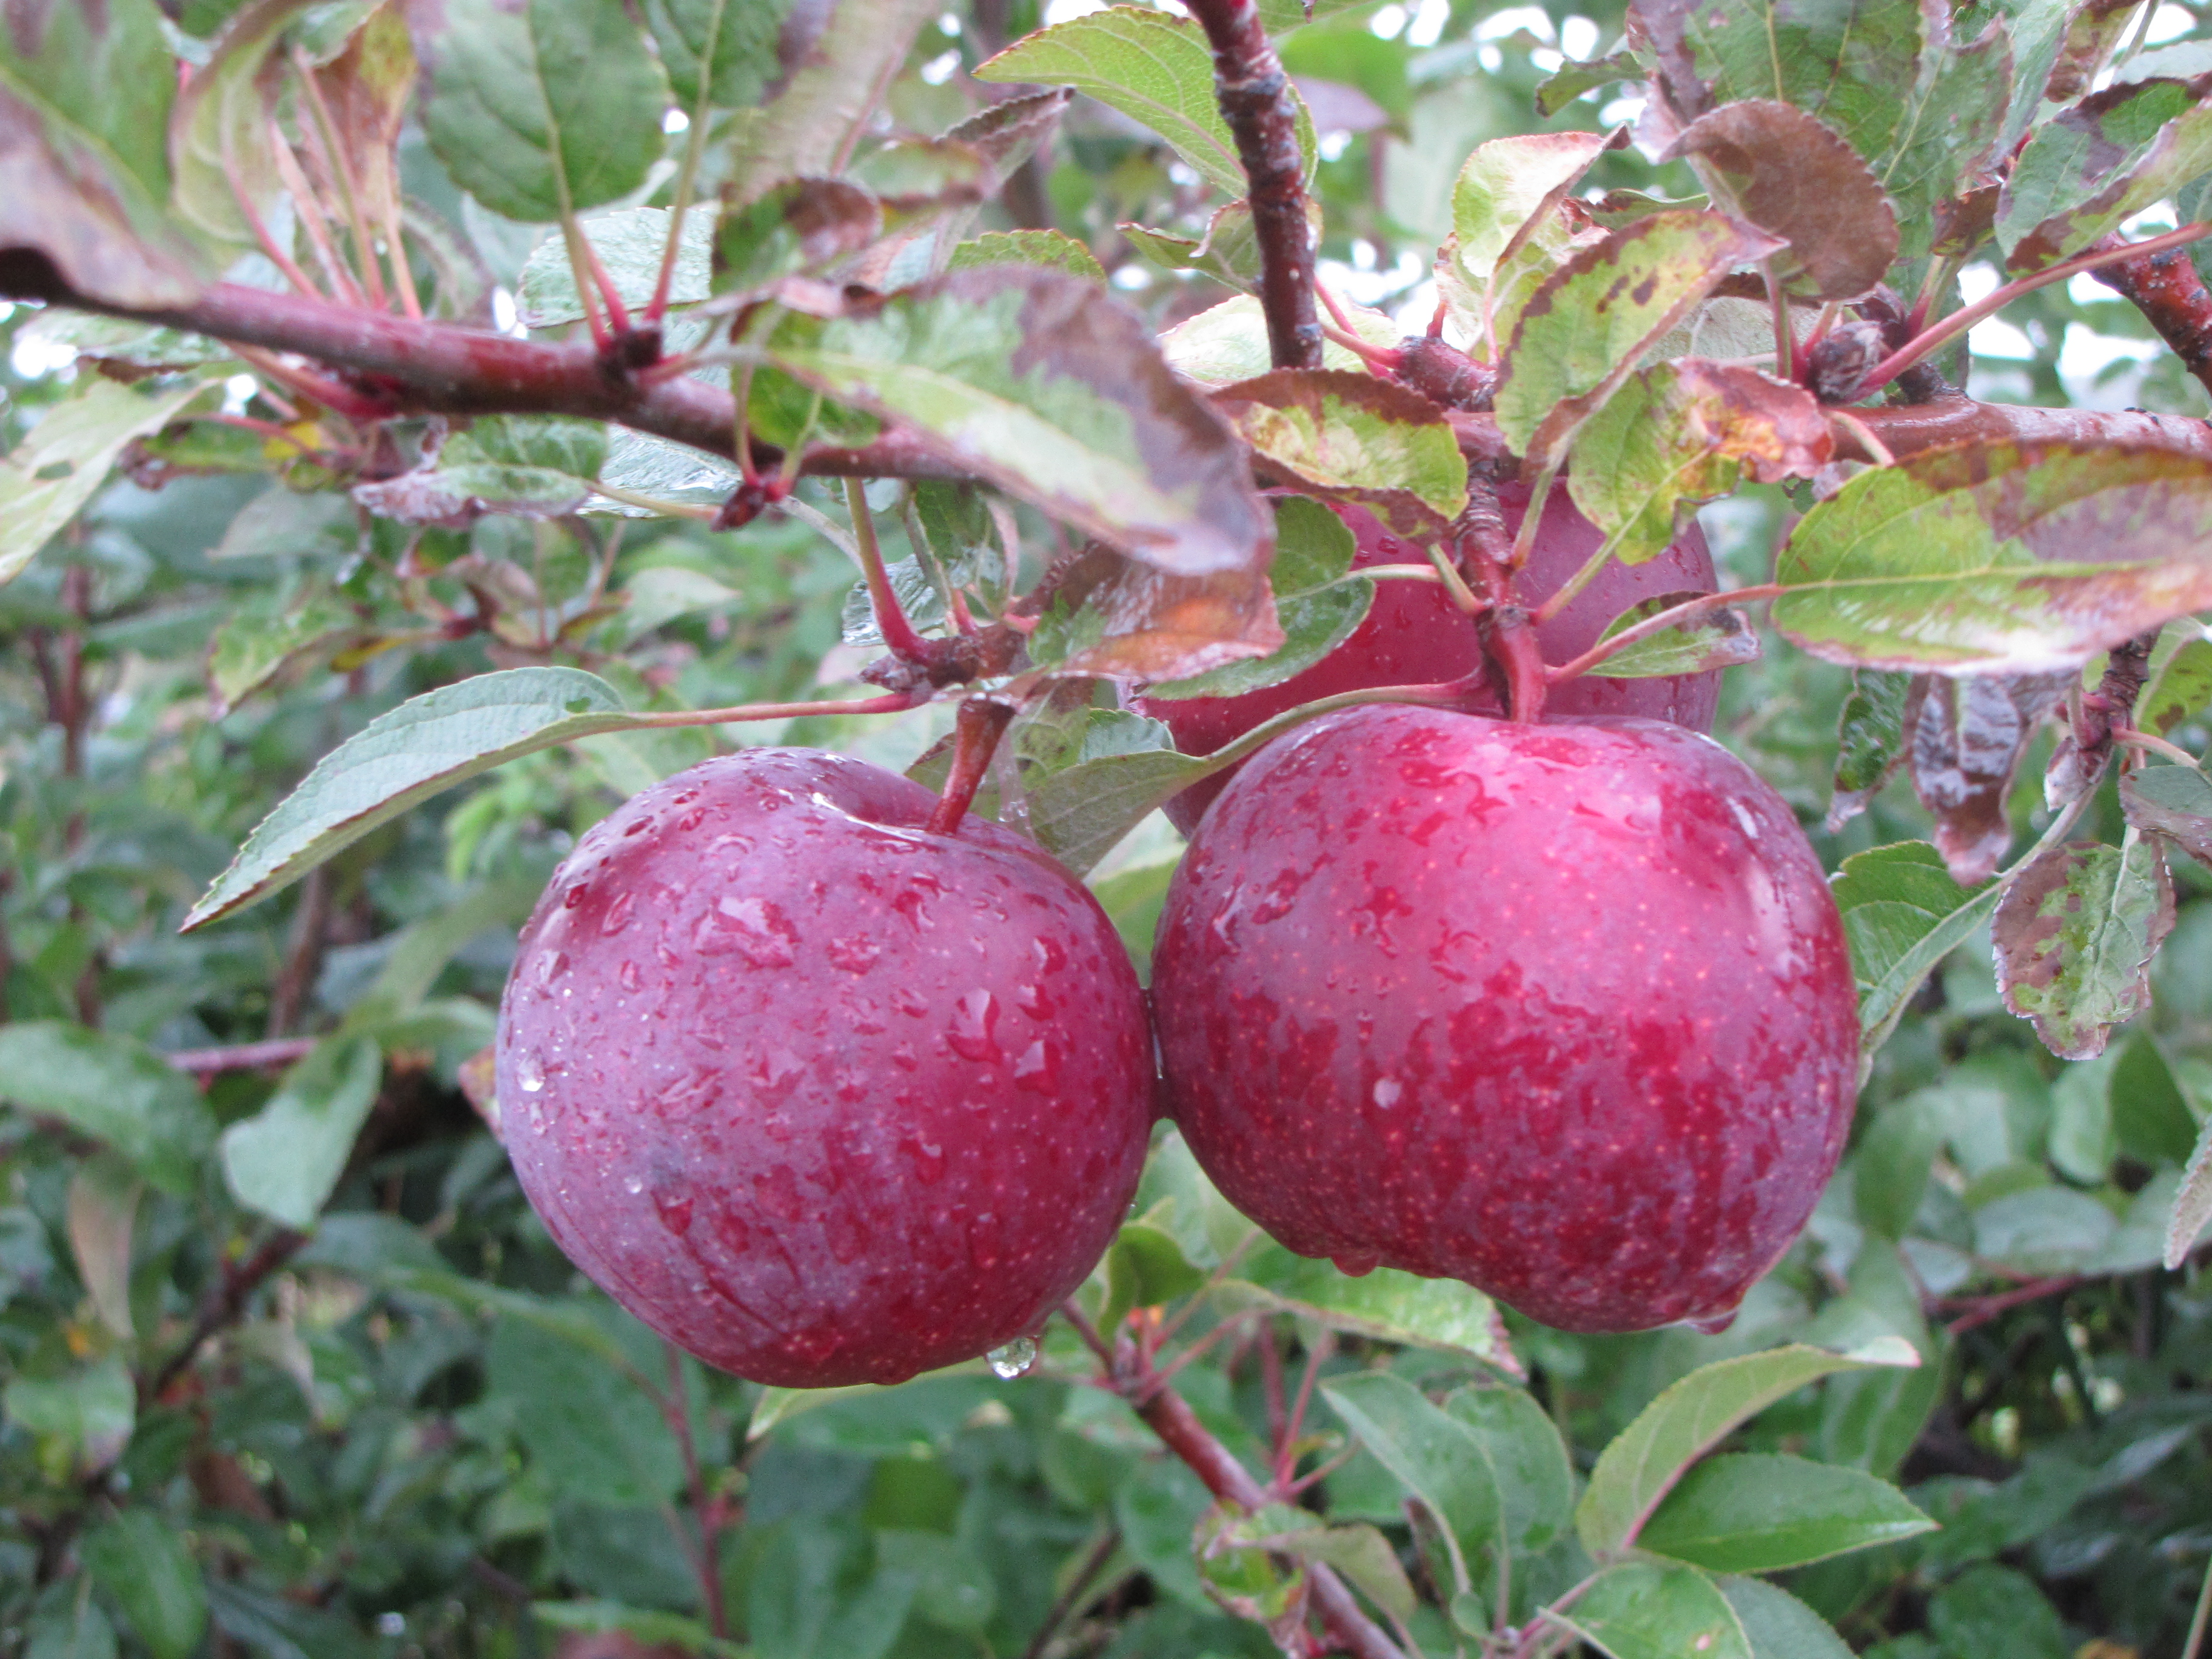 Late-season apples at Bolton Orchards, Bolton, Massachusetts. (Russell Steven Powell photo)